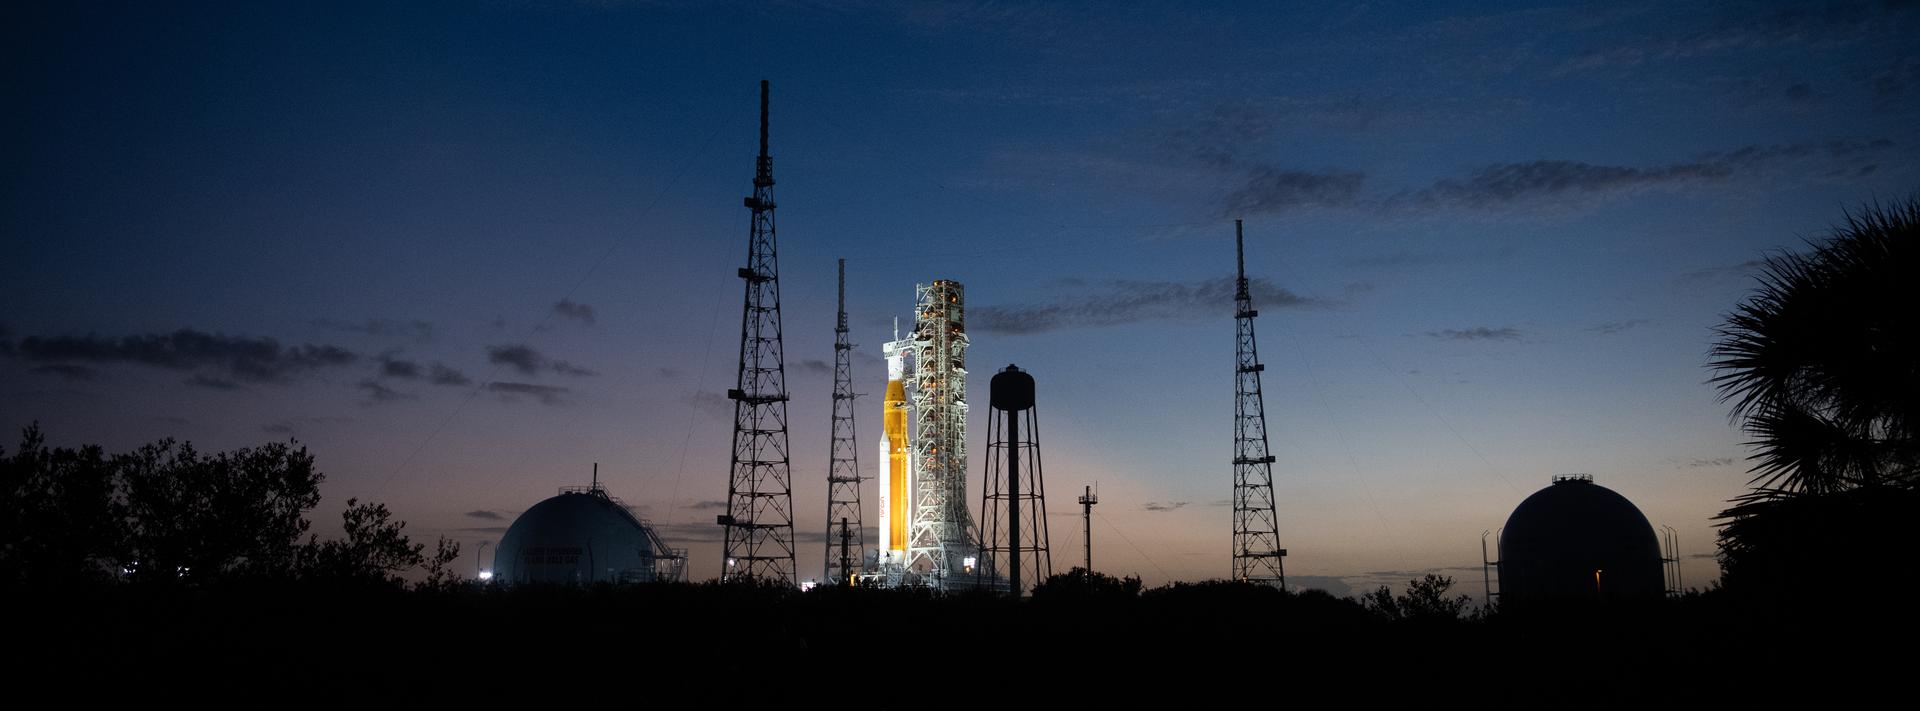 Nasa’s Space Launch System rocket and Orion spacecraft stand at the launch pad at Cape Canaveral, Florida, on 6 November 2022